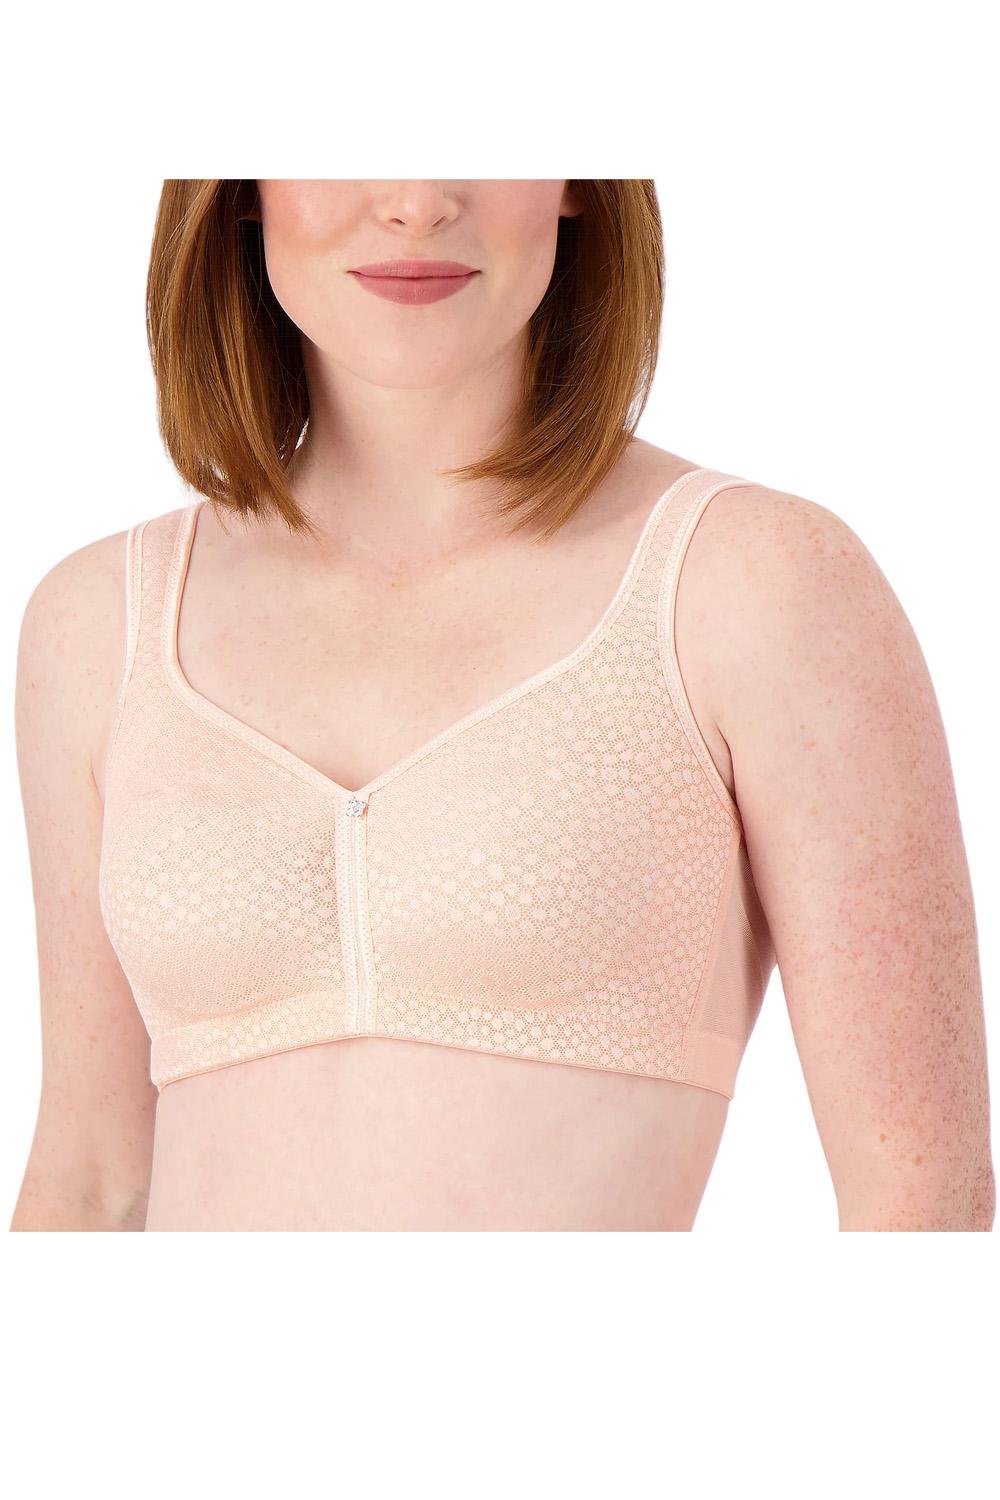 Breezies Diamond Shimmer Unlined Support Bra 